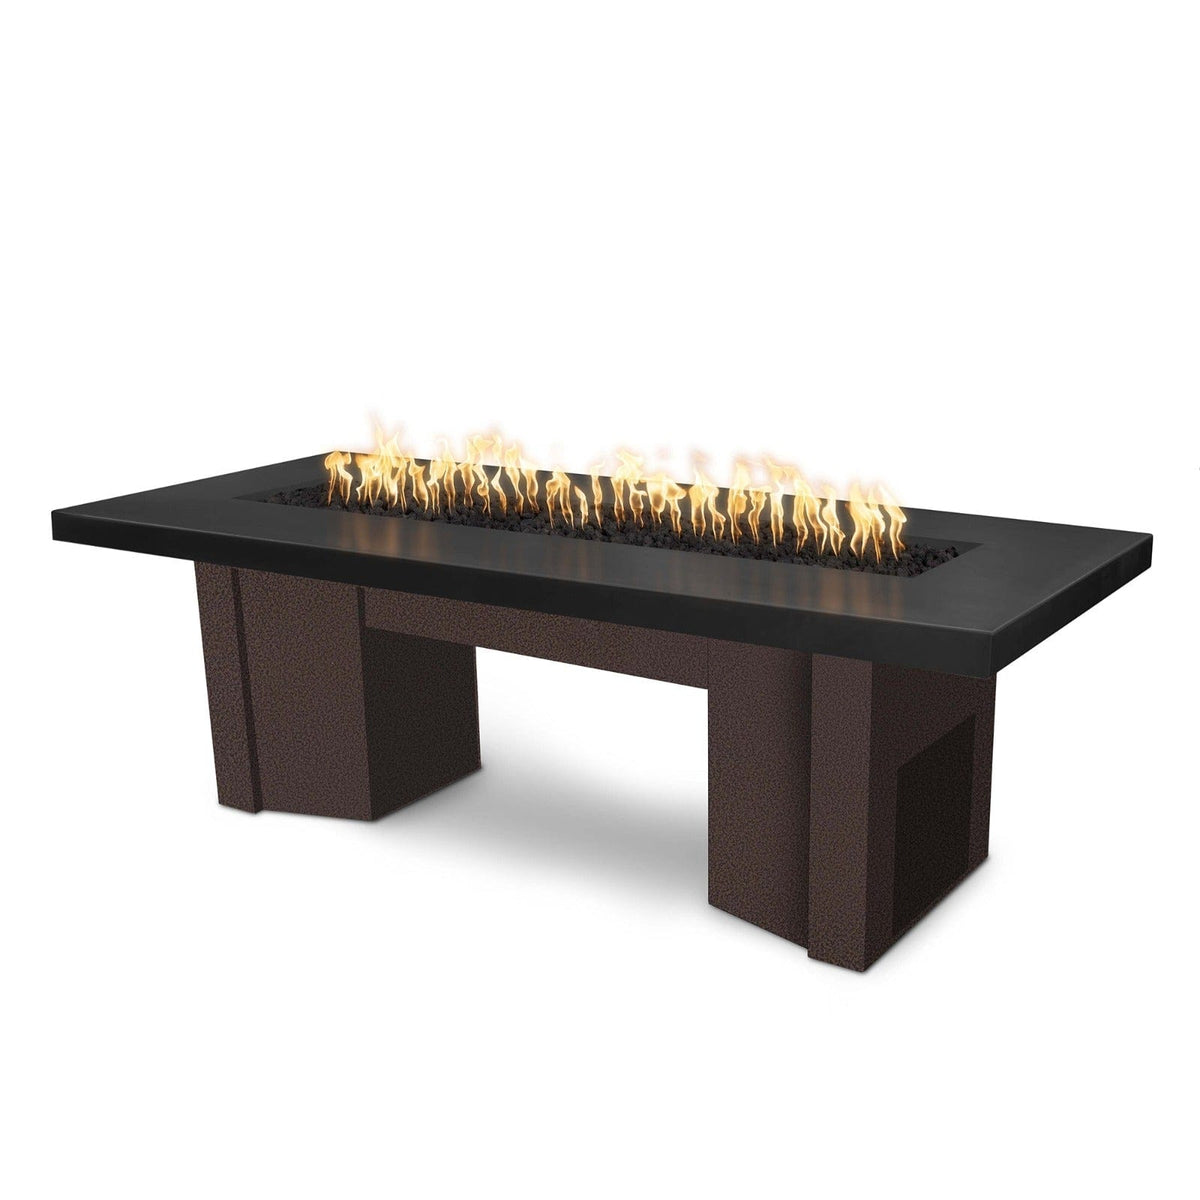 The Outdoor Plus Fire Features Black (-BLK) / Copper Vein Powder Coated Steel (-CPV) The Outdoor Plus 60&quot; Alameda Fire Table Smooth Concrete in Liquid Propane - Match Lit with Flame Sense System / OPT-ALMGFRC60FSML-LP